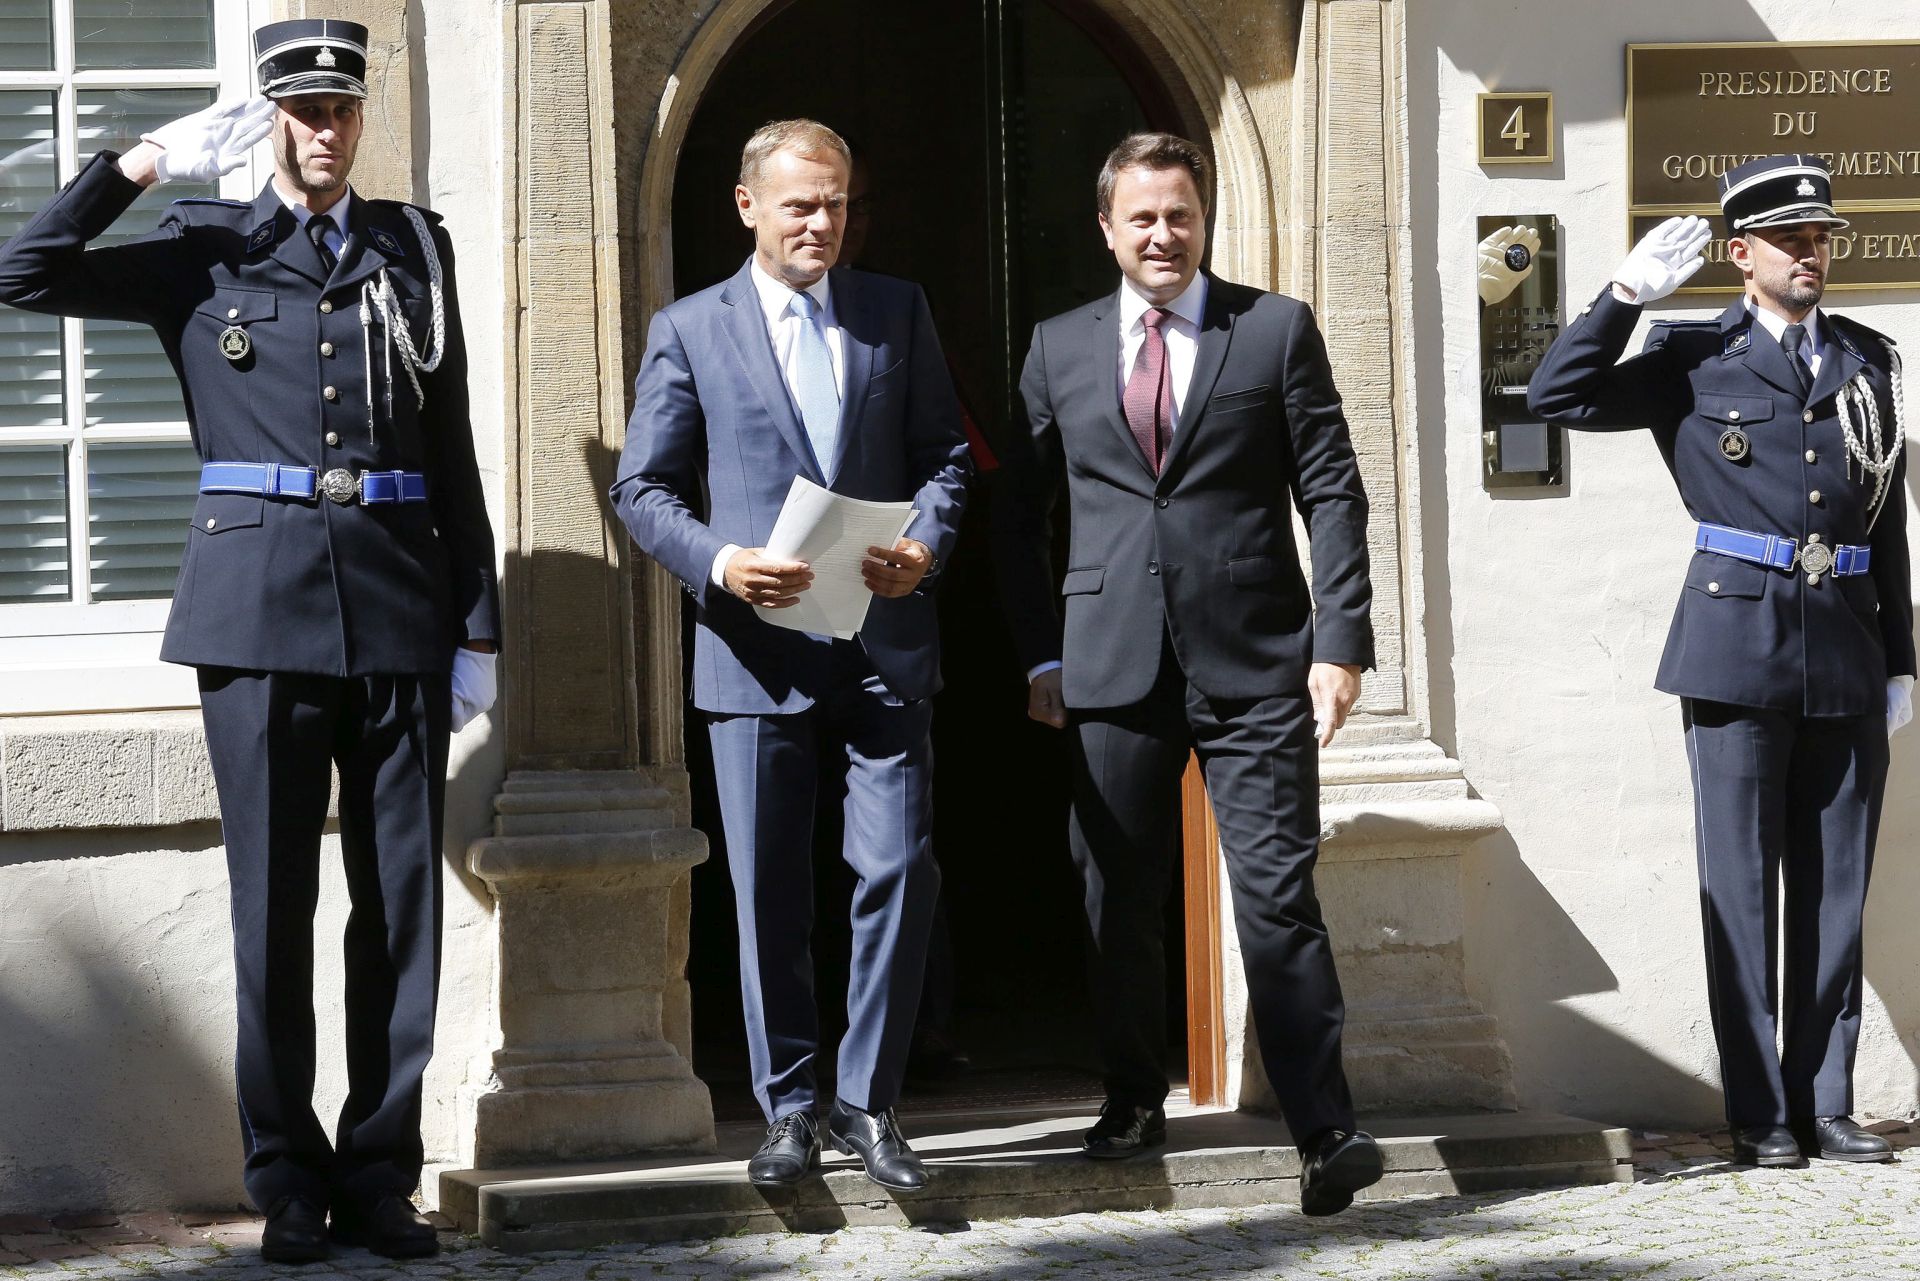 epa05518373 European Council President Donald Tusk (C-L) and Luxembourg Prime Minister Xavier Bettel (C-R) walk together after a meeting in Luxembourg, 01 September 2016.  EPA/JULIEN WARNAND